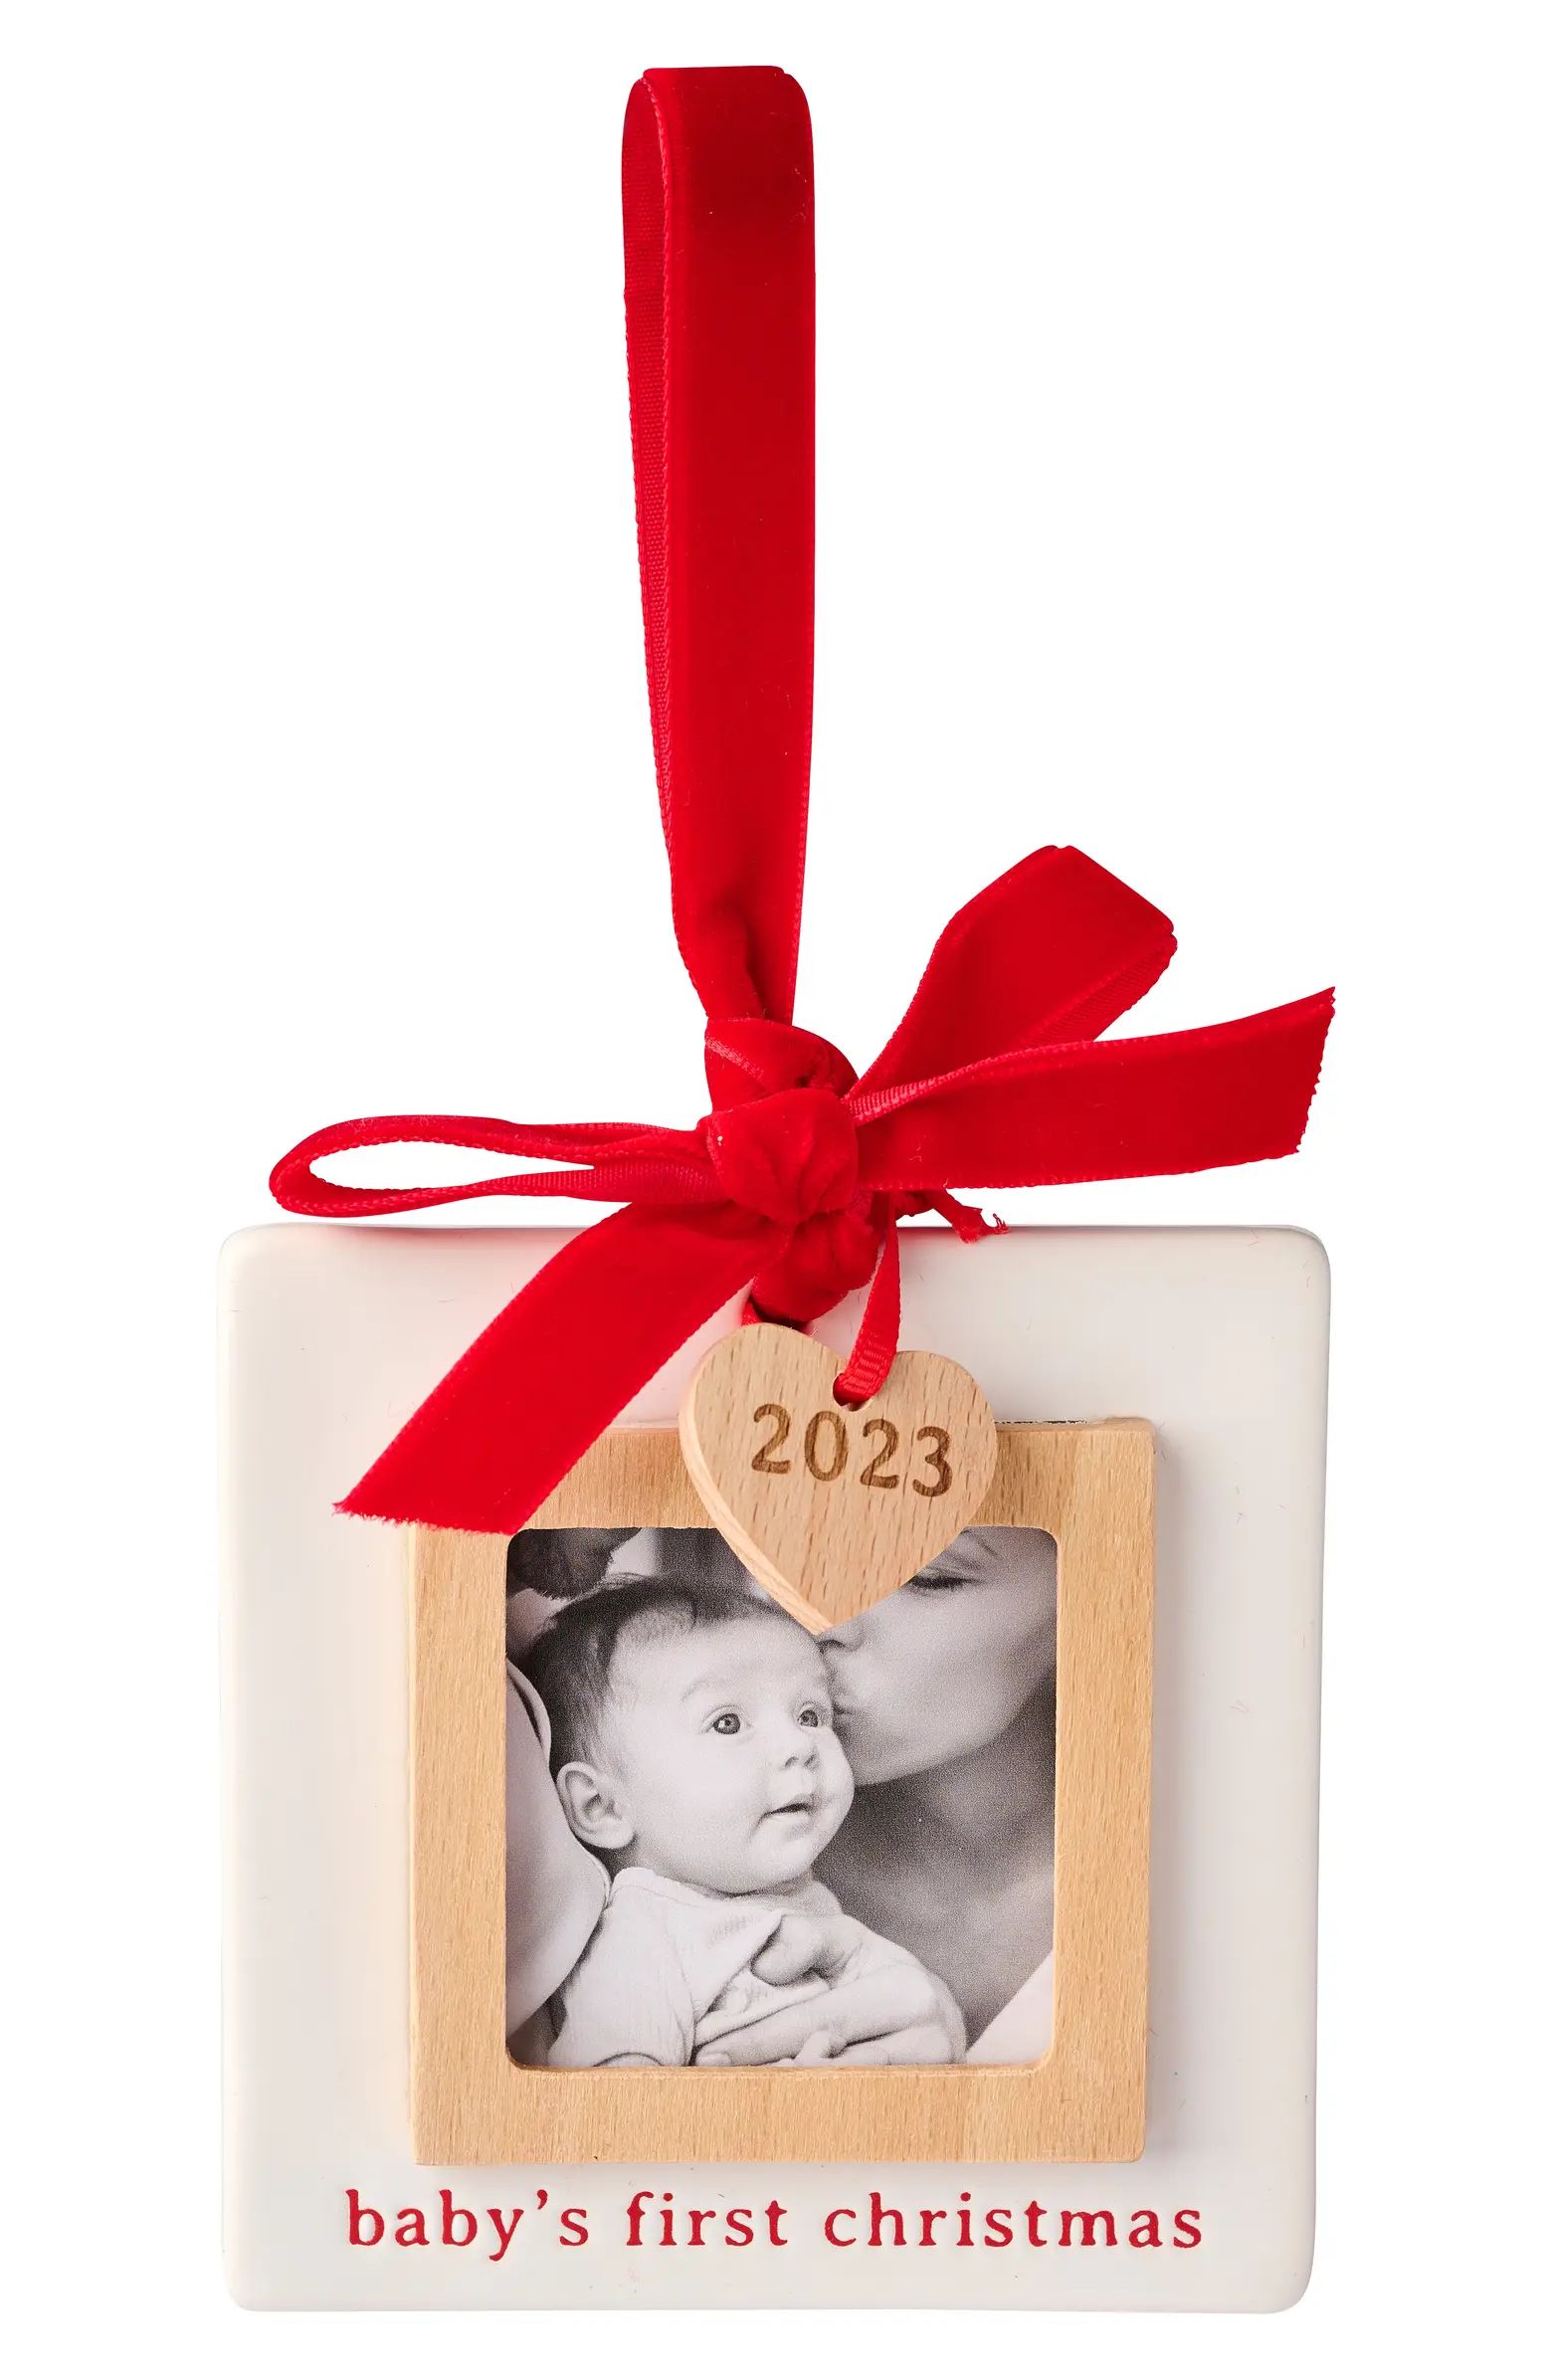 Mud Pie Baby's First Christmas Frame Ornament | Nordstrom | Nordstrom